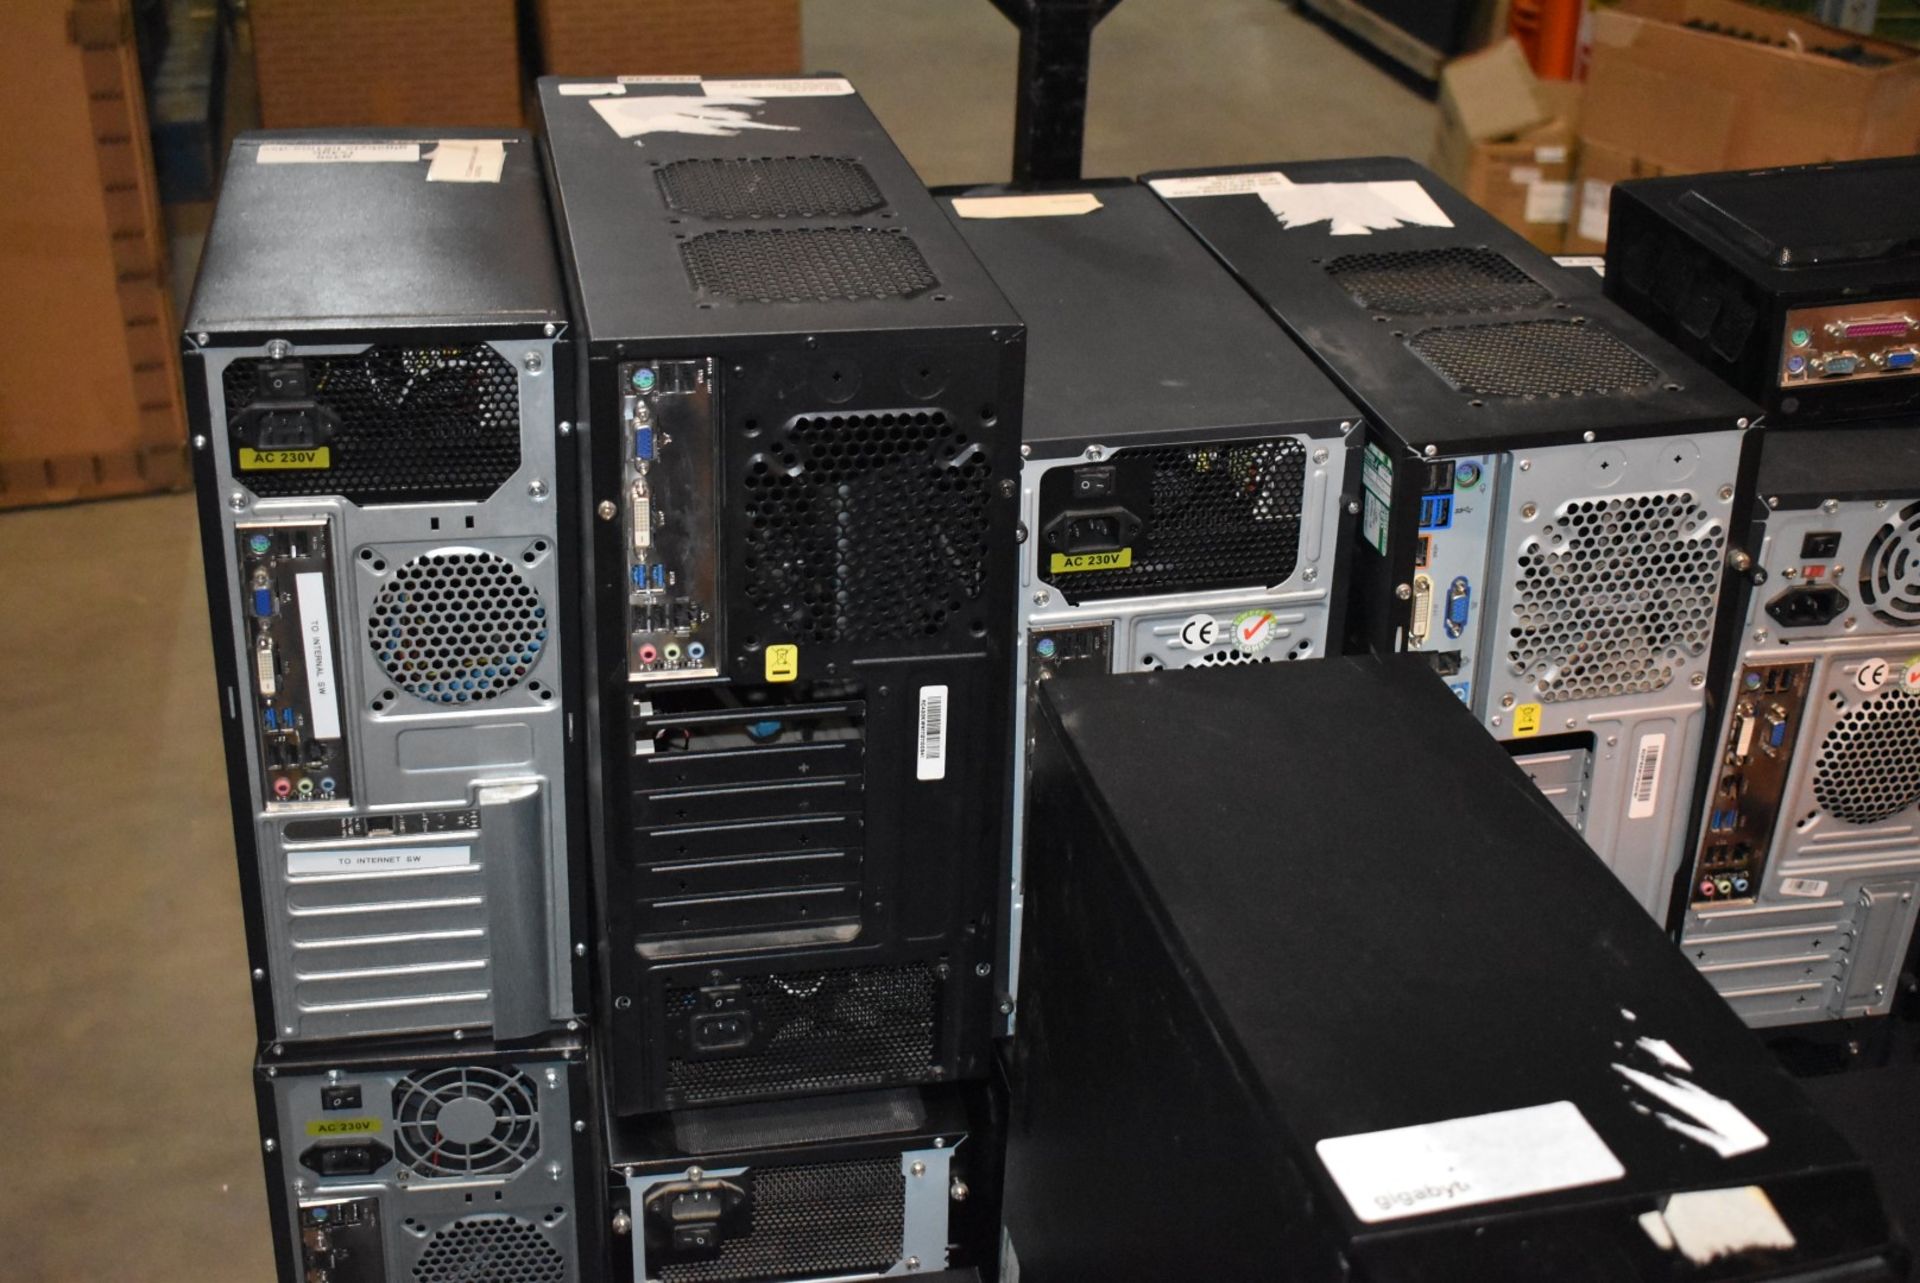 20 x Assorted Desktop Computers - Various Specifications - Unchecked and Untested Job Lot - Image 33 of 33